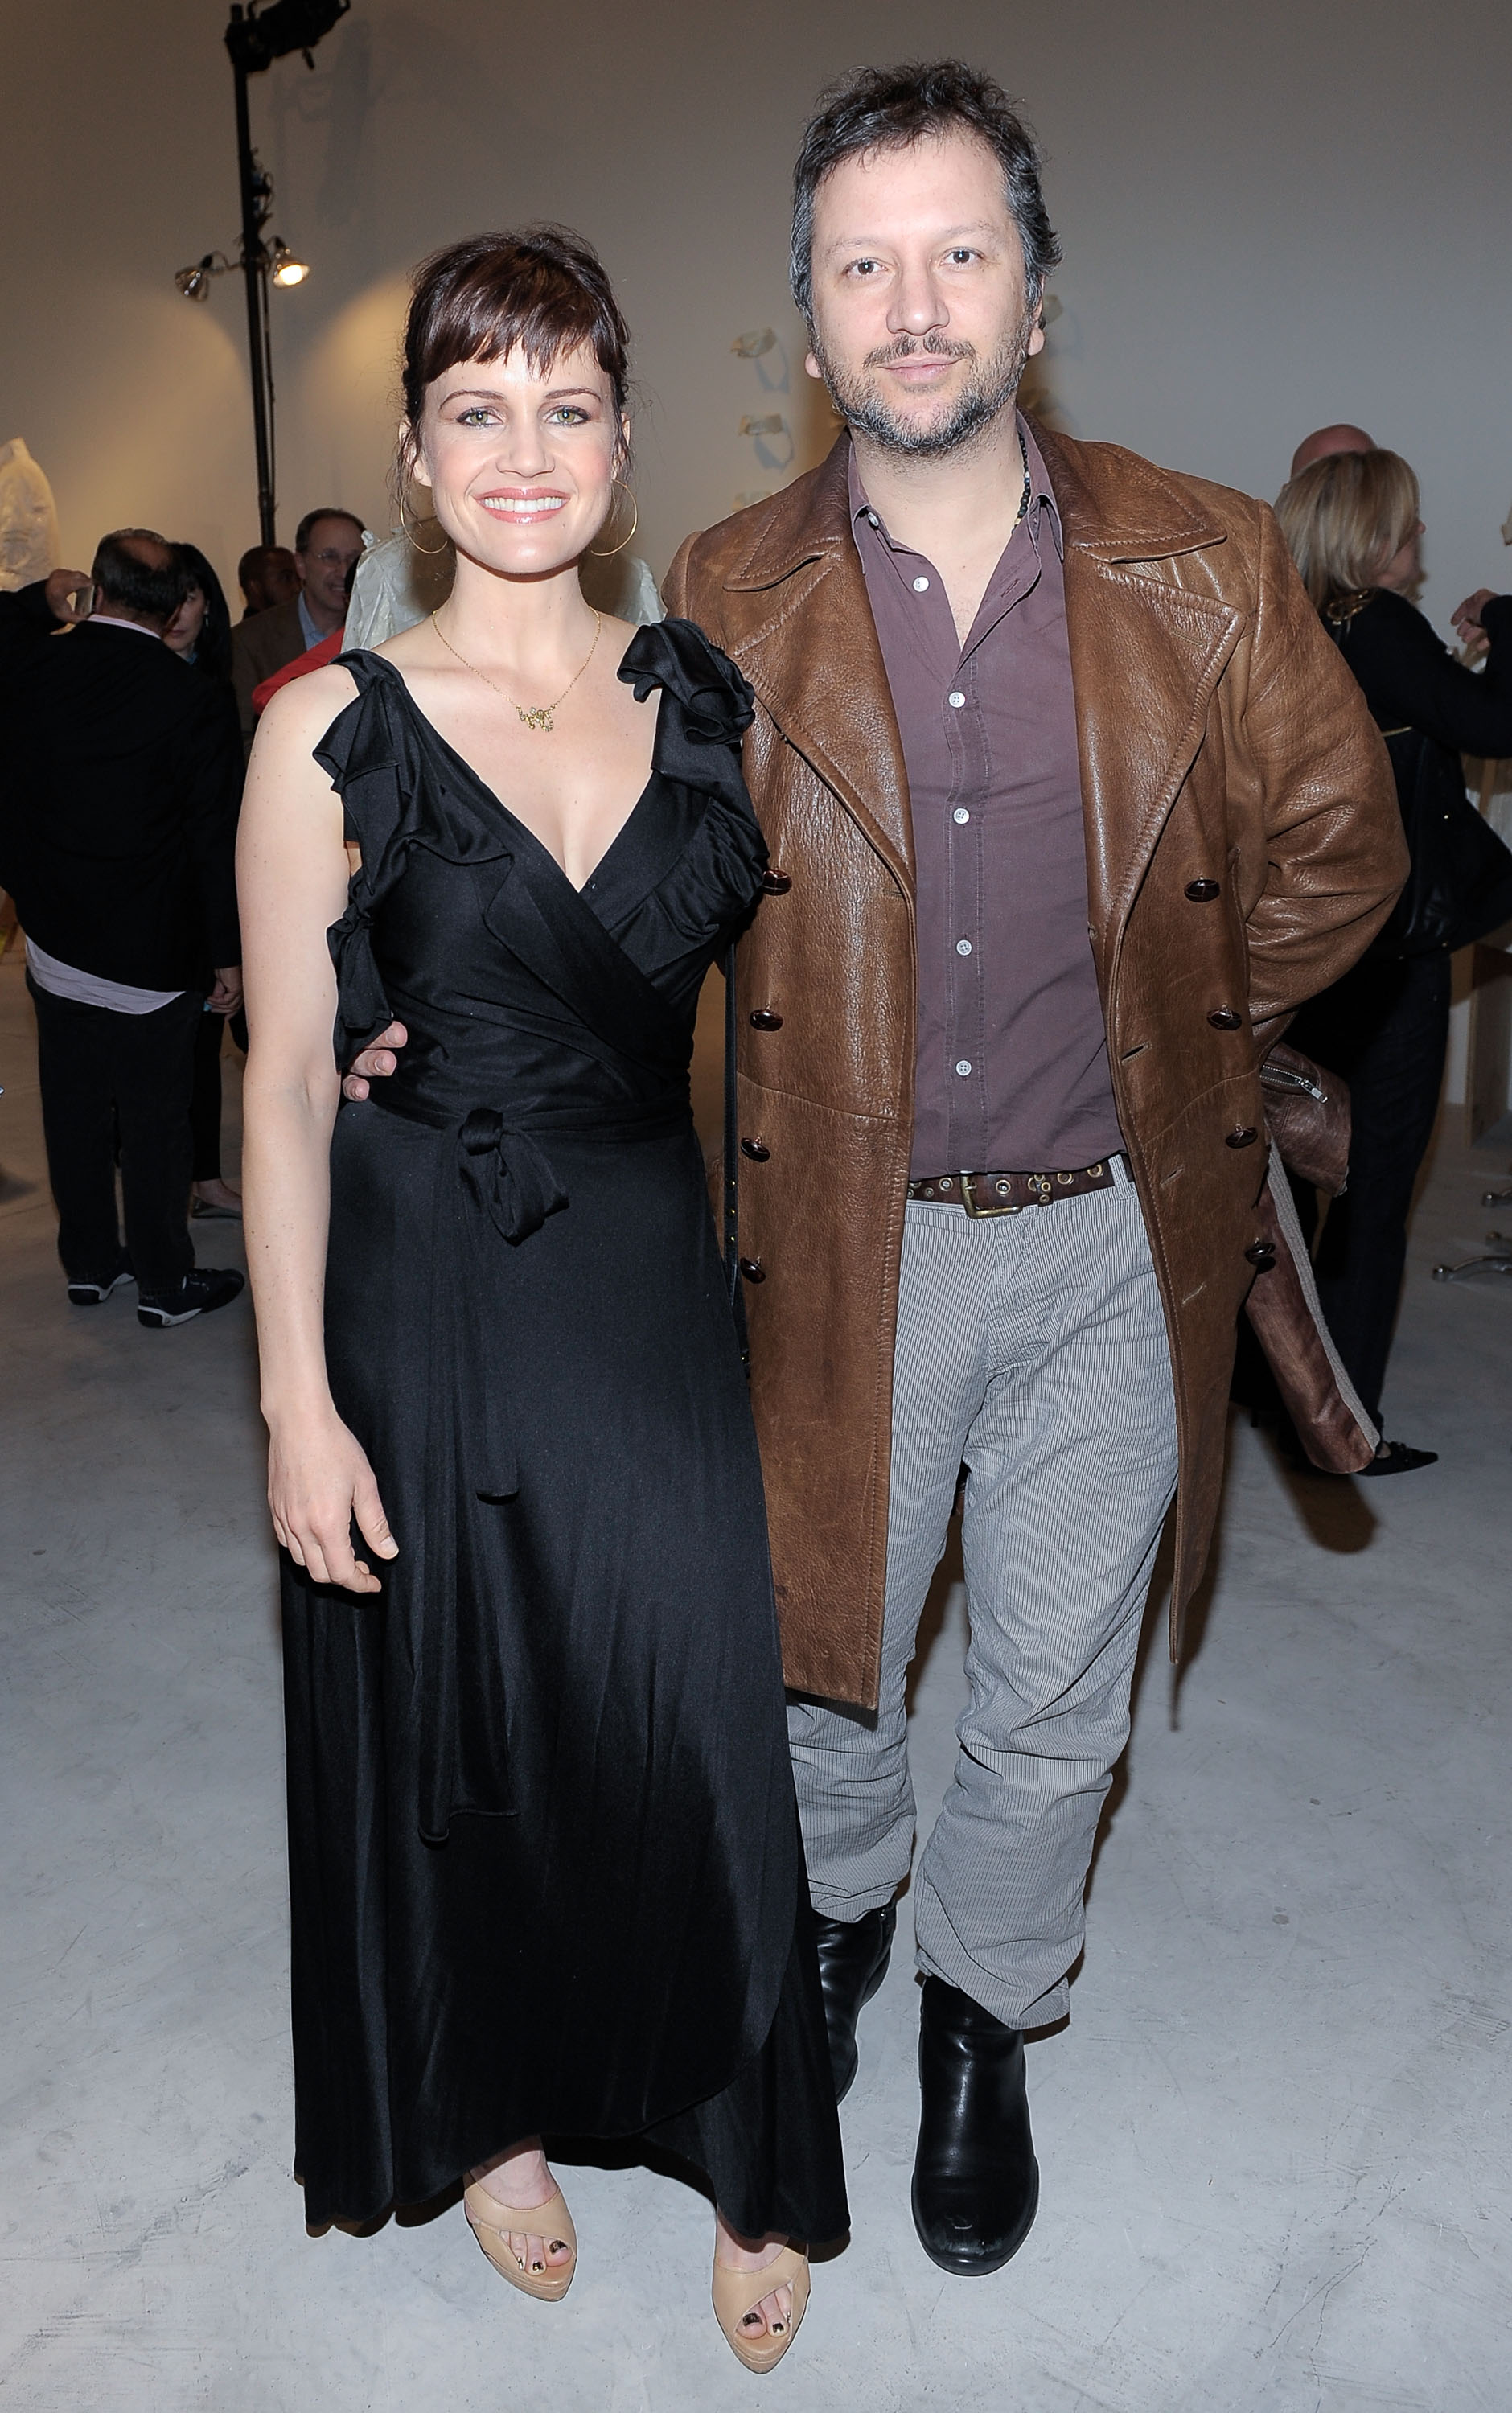 Carla Gugino and Sebastian Gutierrez at the Los Angeles party for Alteration presented by Greg Lauren on May 1, 2010, in Los Angeles, California. | Source: Getty Images